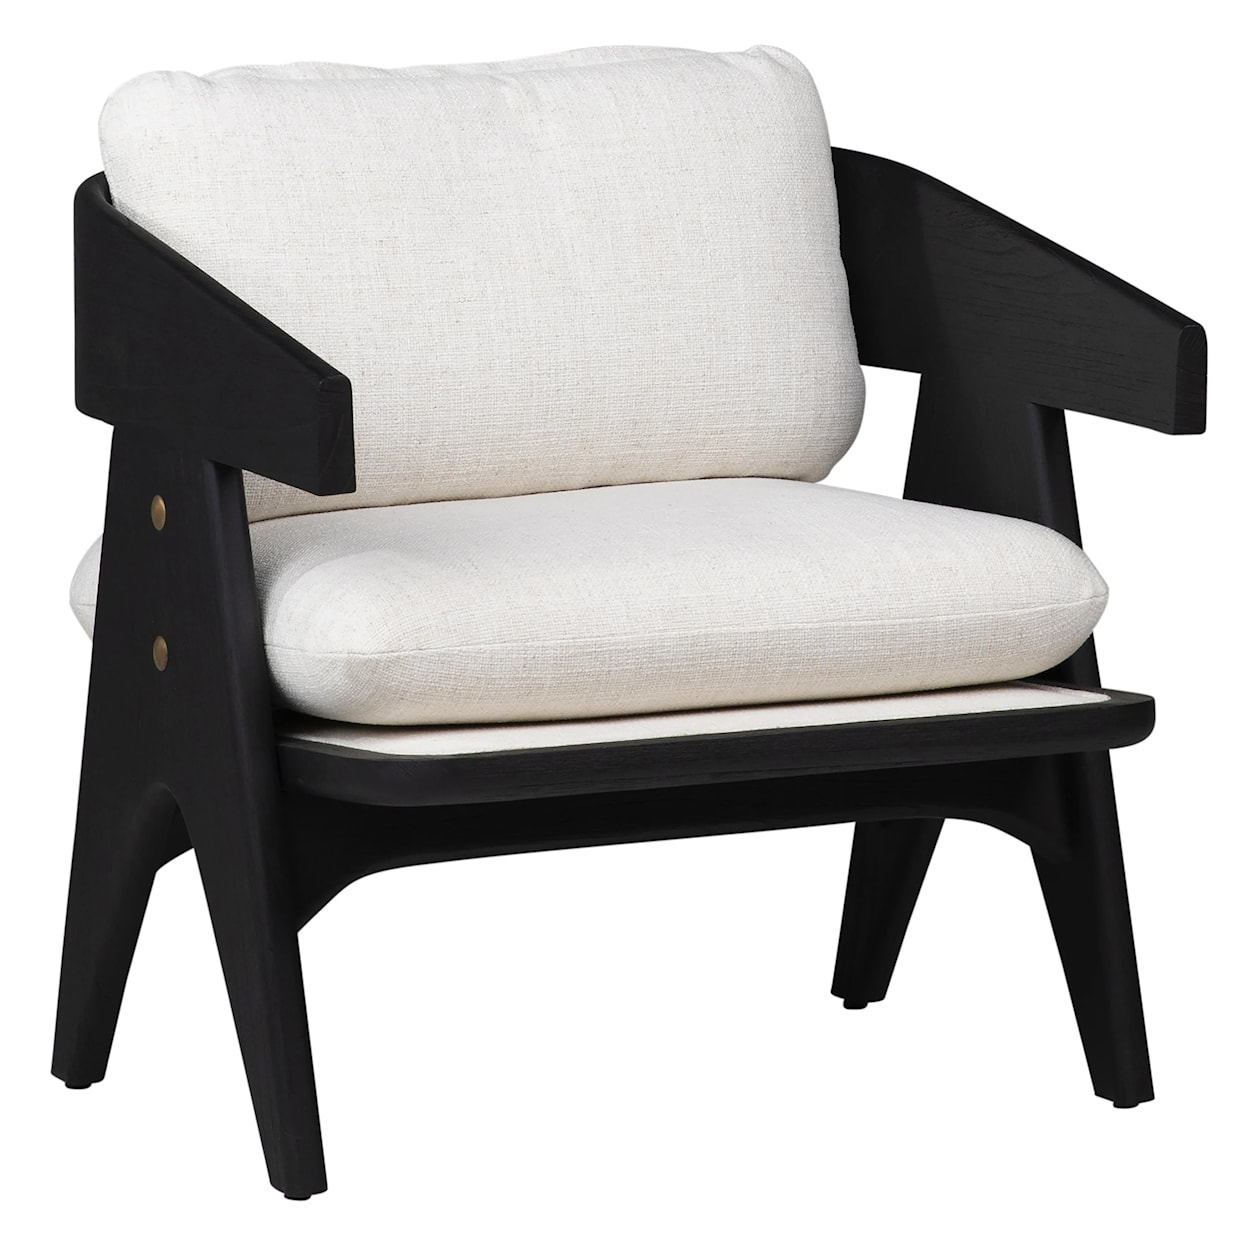 Dovetail Furniture Adelaide Adelaide Occasional Chair